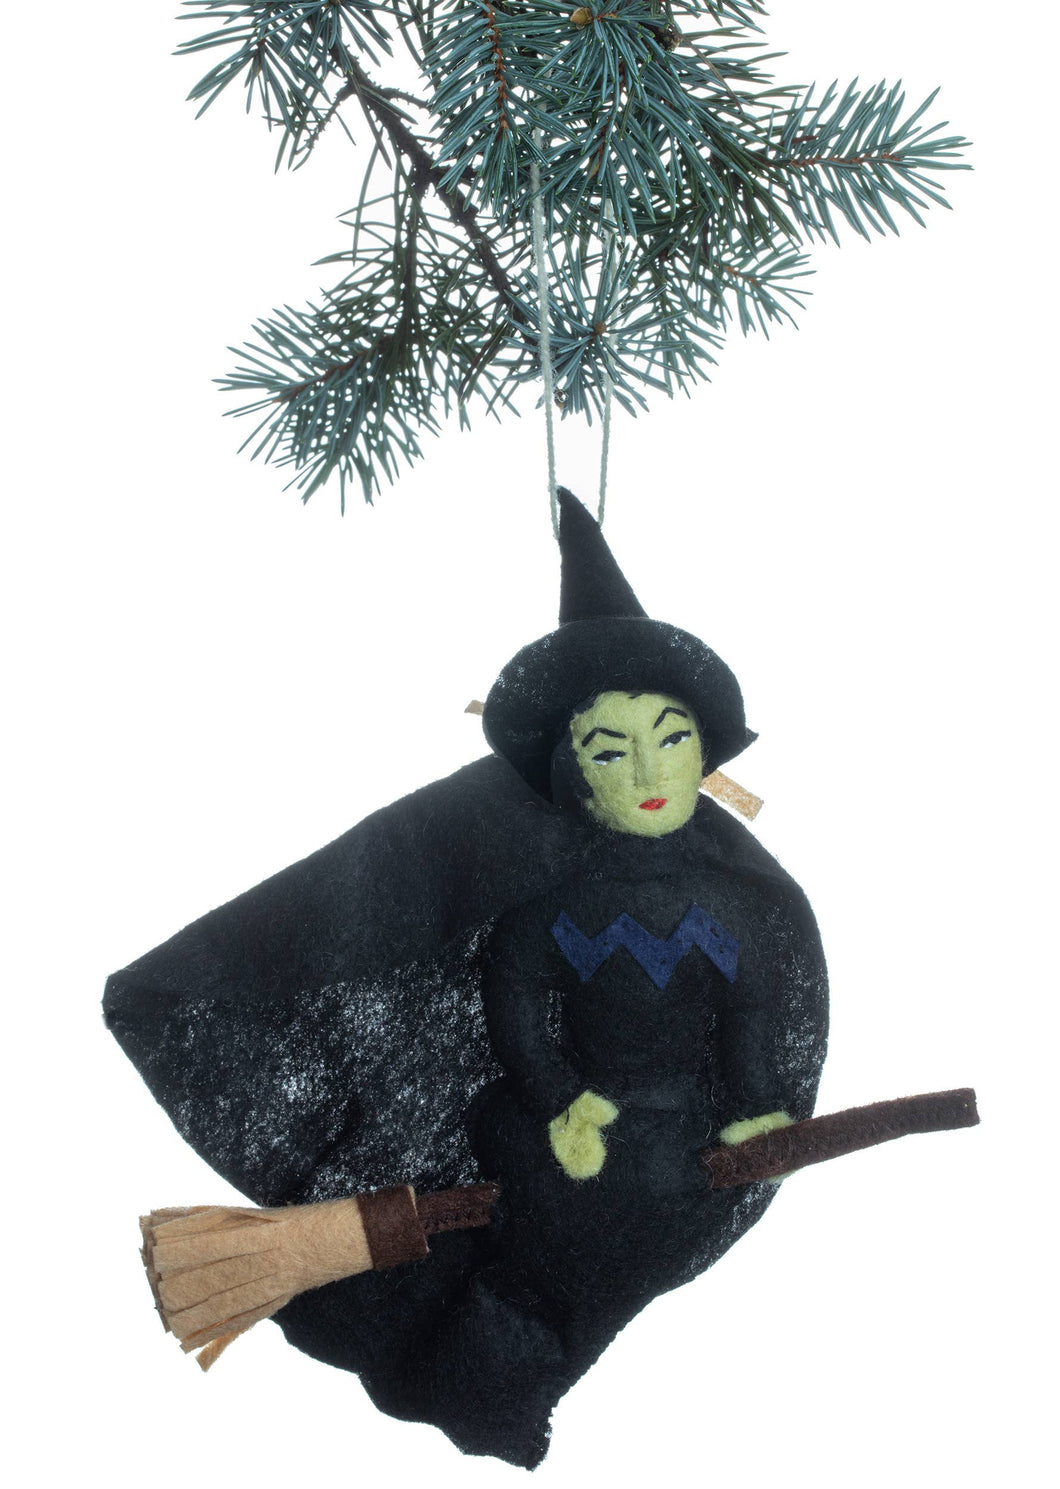 Wicked Witch of the West Ornament